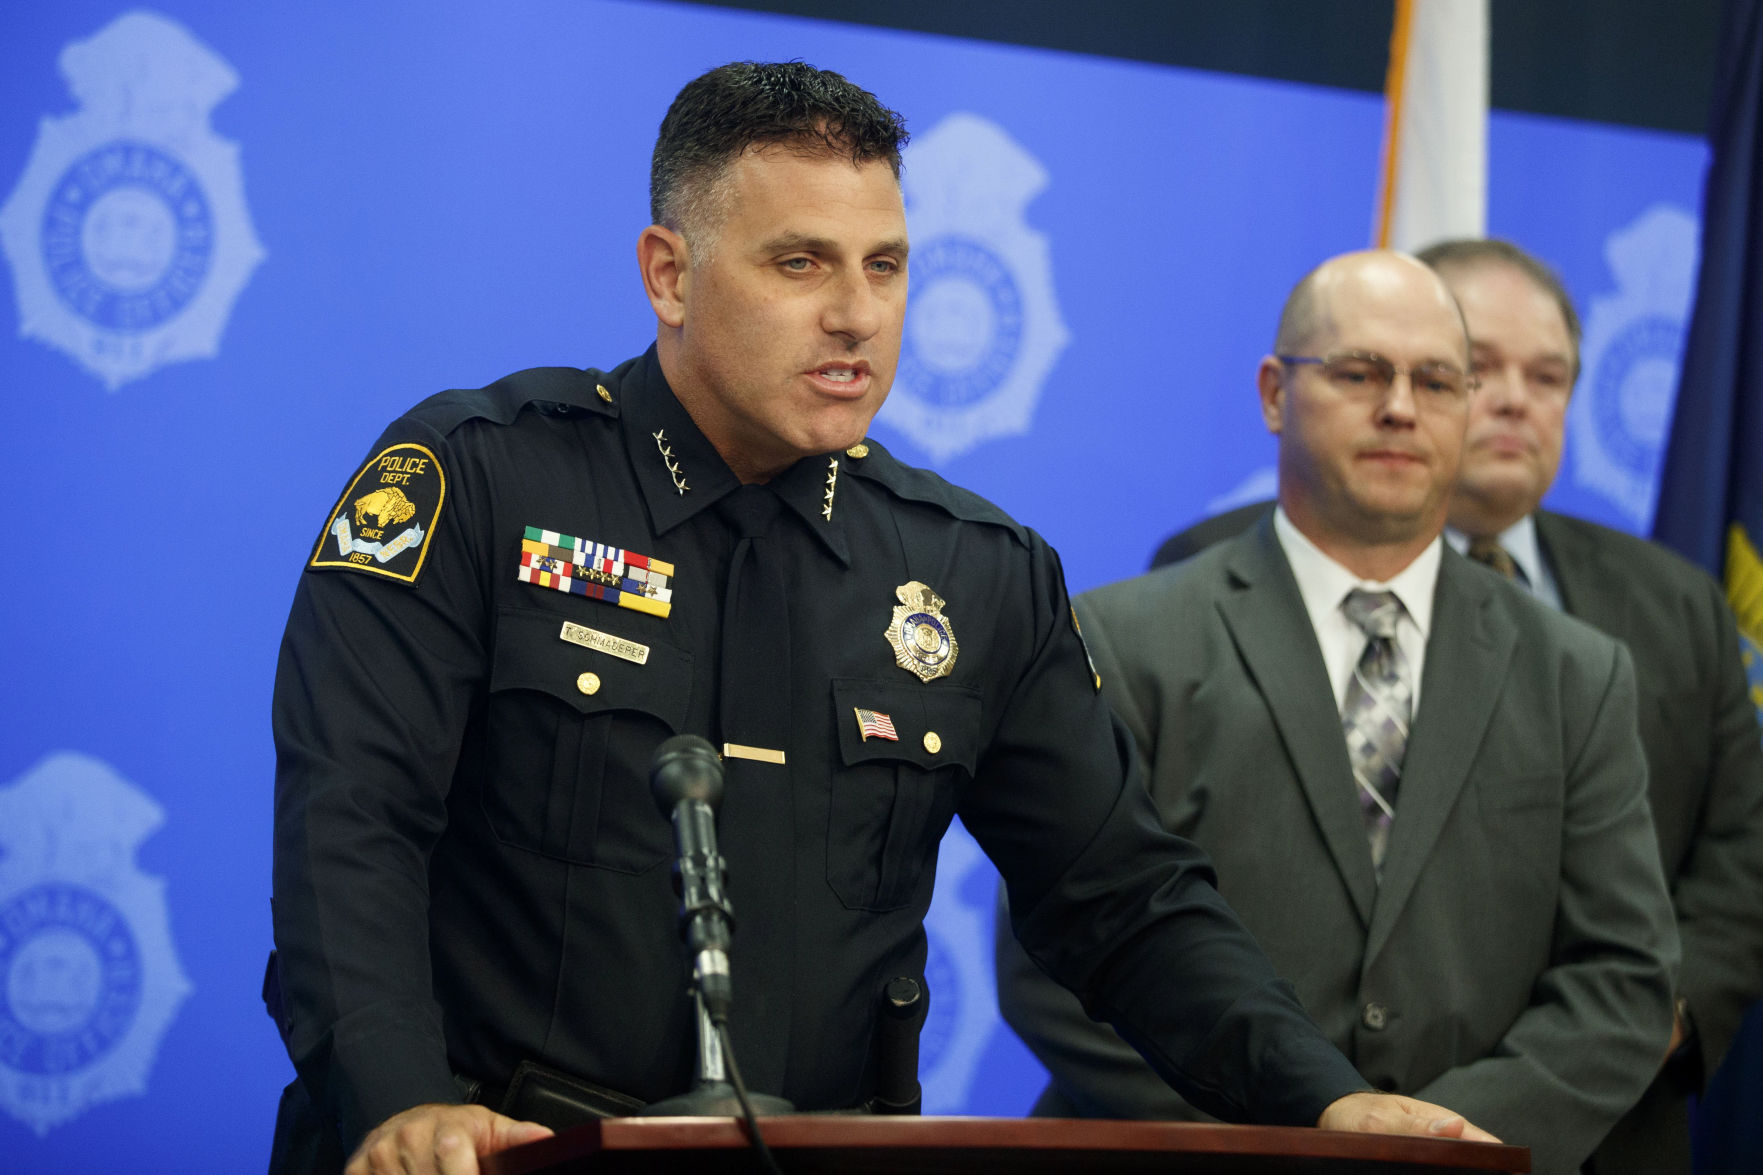 Omaha police say all DNA collected in controversial 2004 sweep has been ...